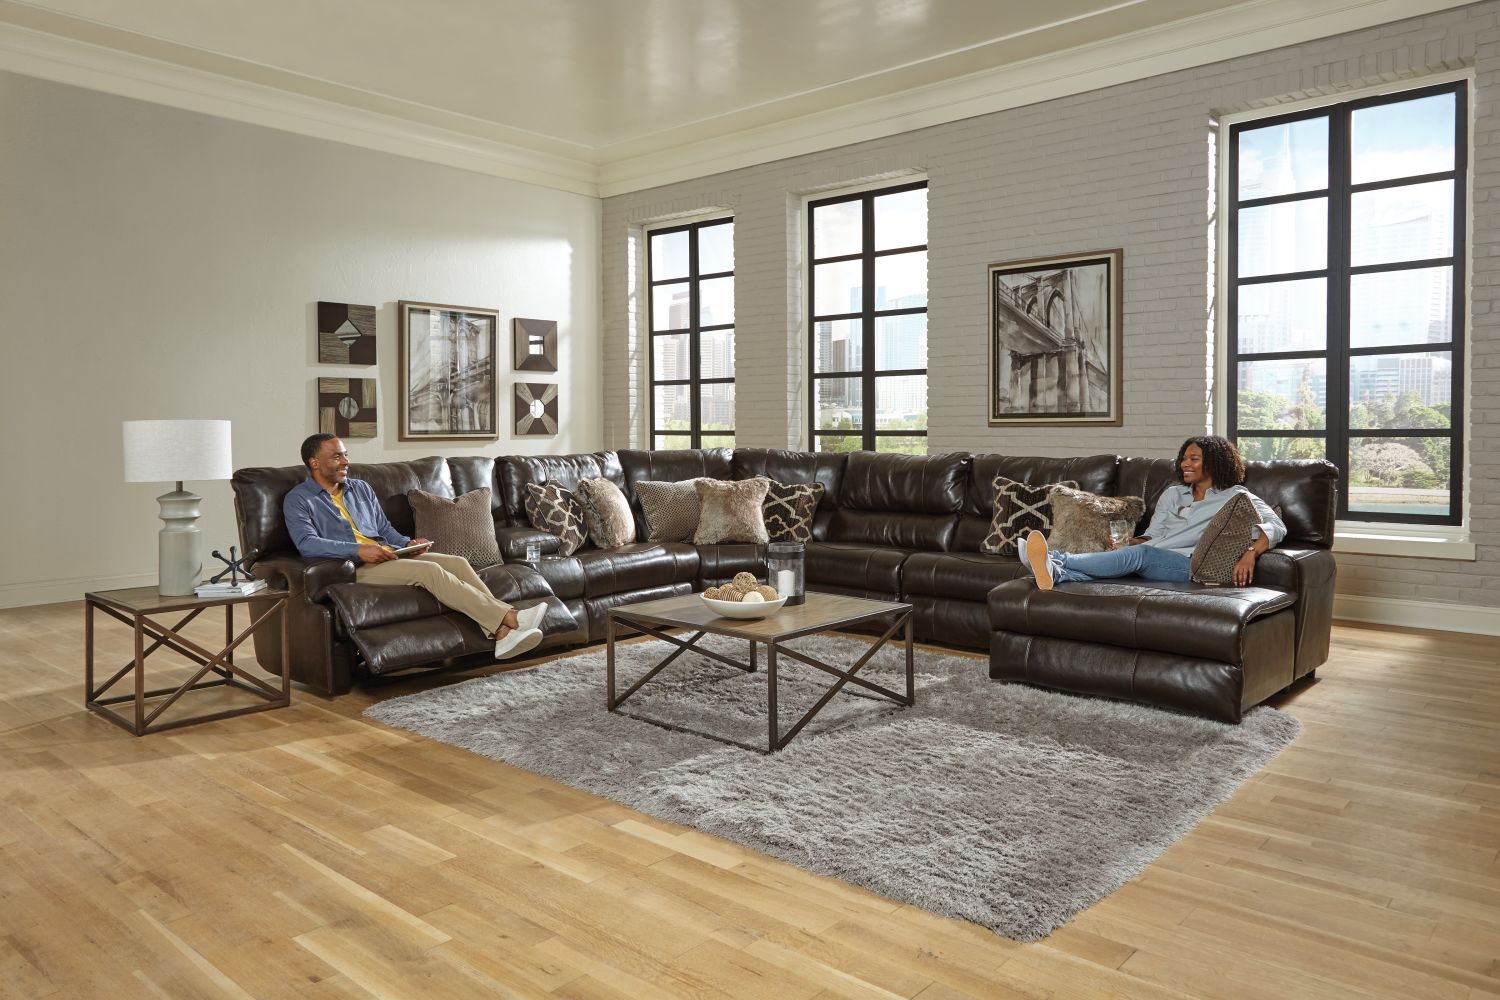 Catnapper Como Modular Sectional Chocolate CHAISE 720369000000